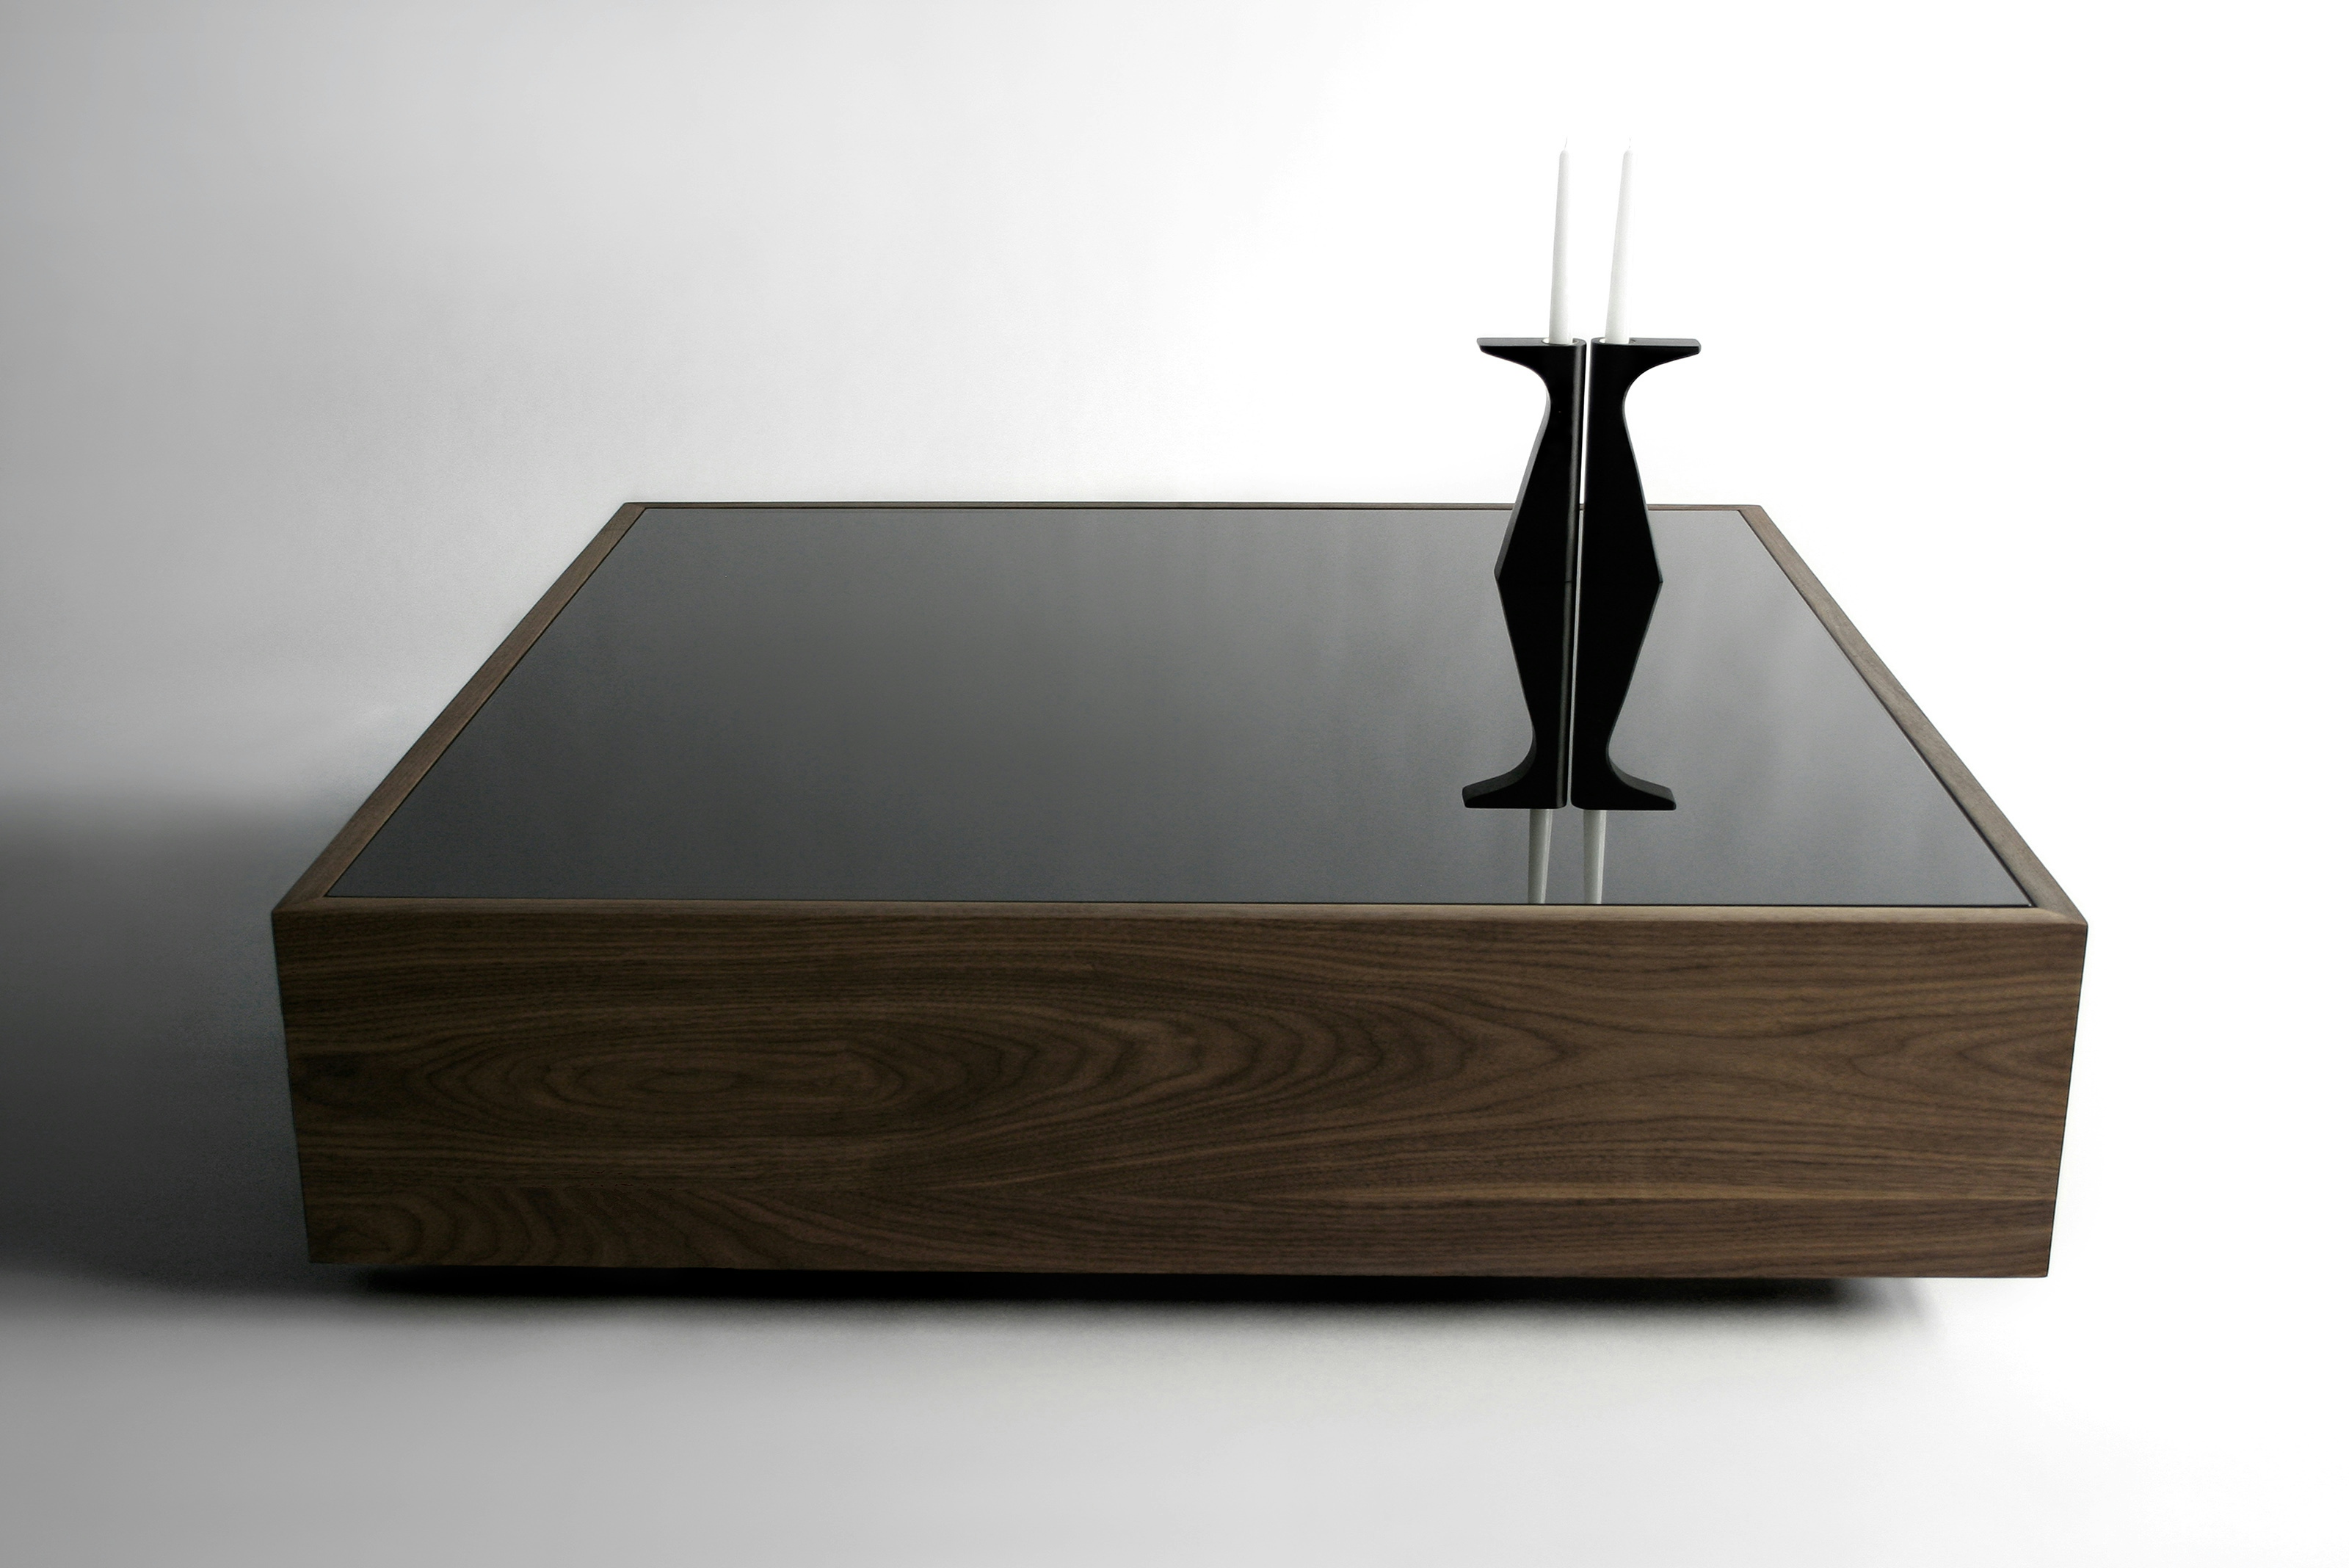 Phase Design Narcissist Coffee Table 5 Web